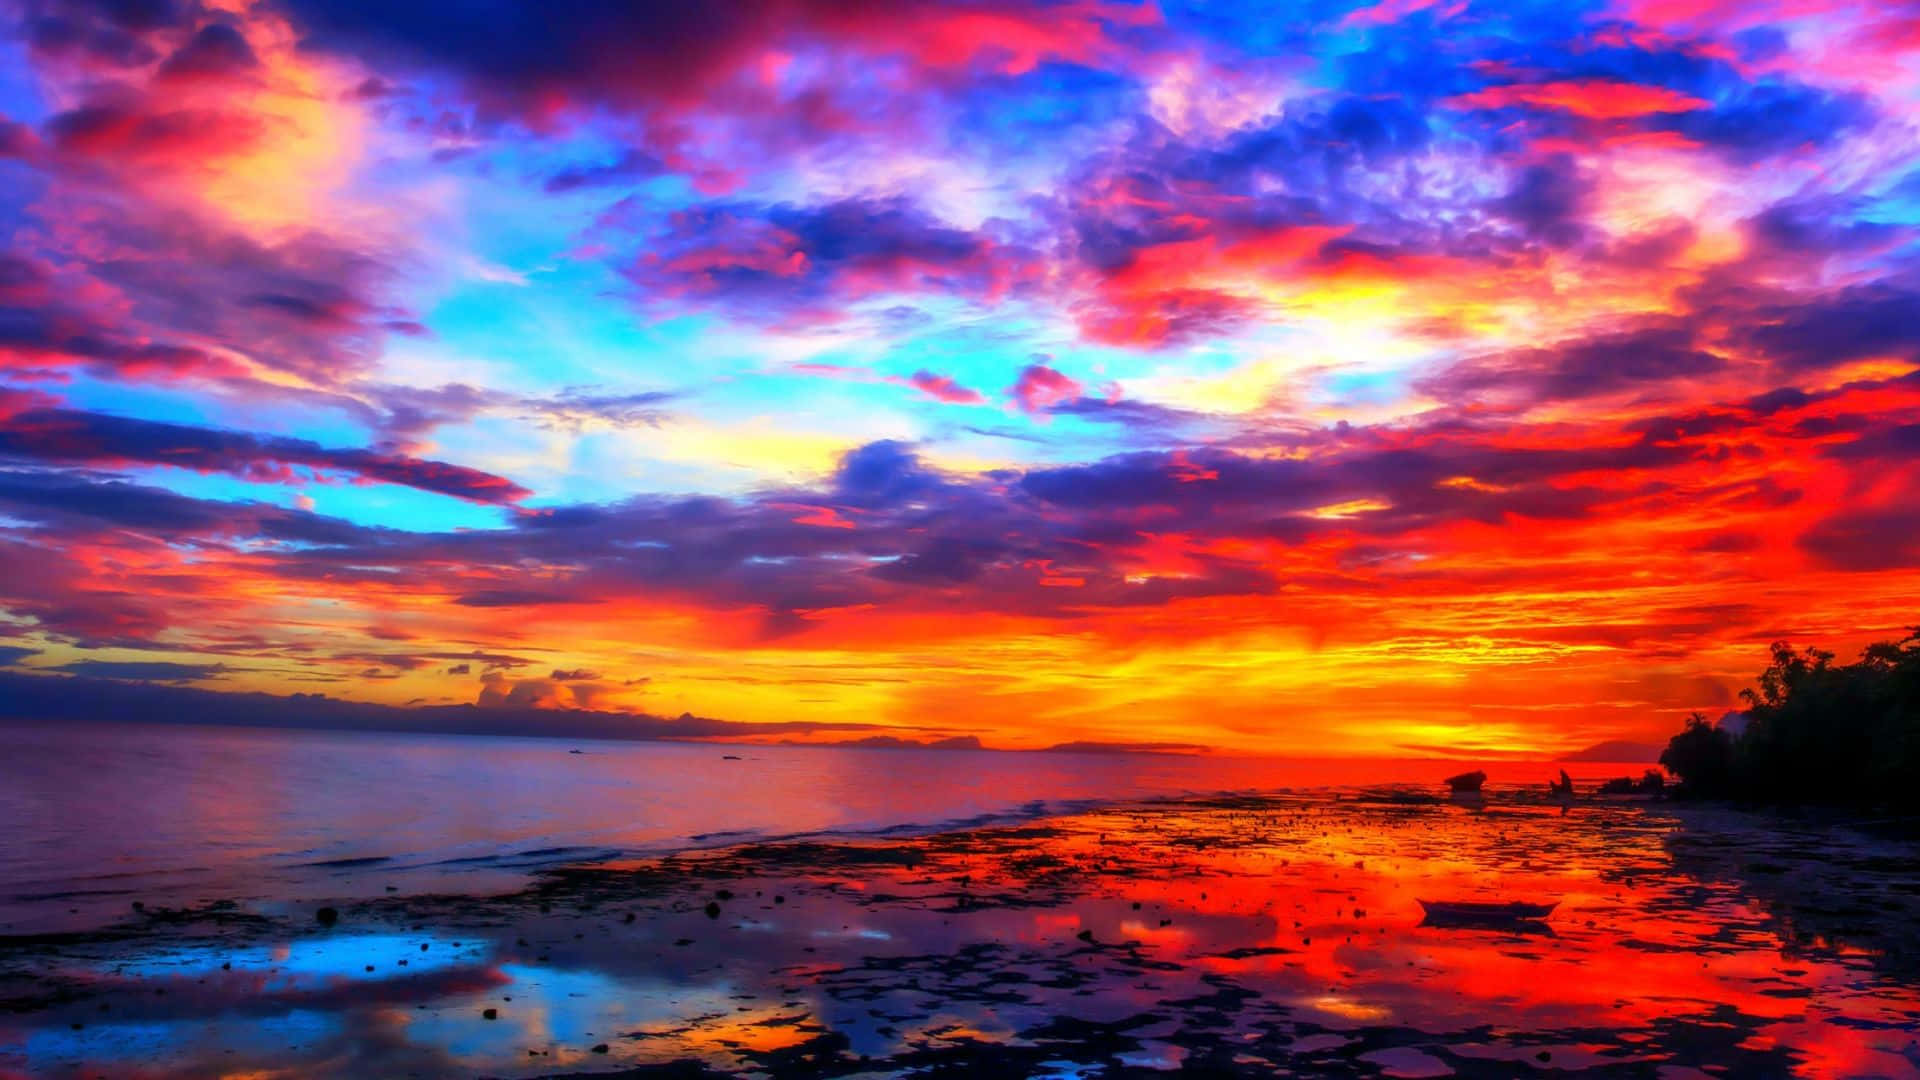 100+] Colorful Sky Pictures